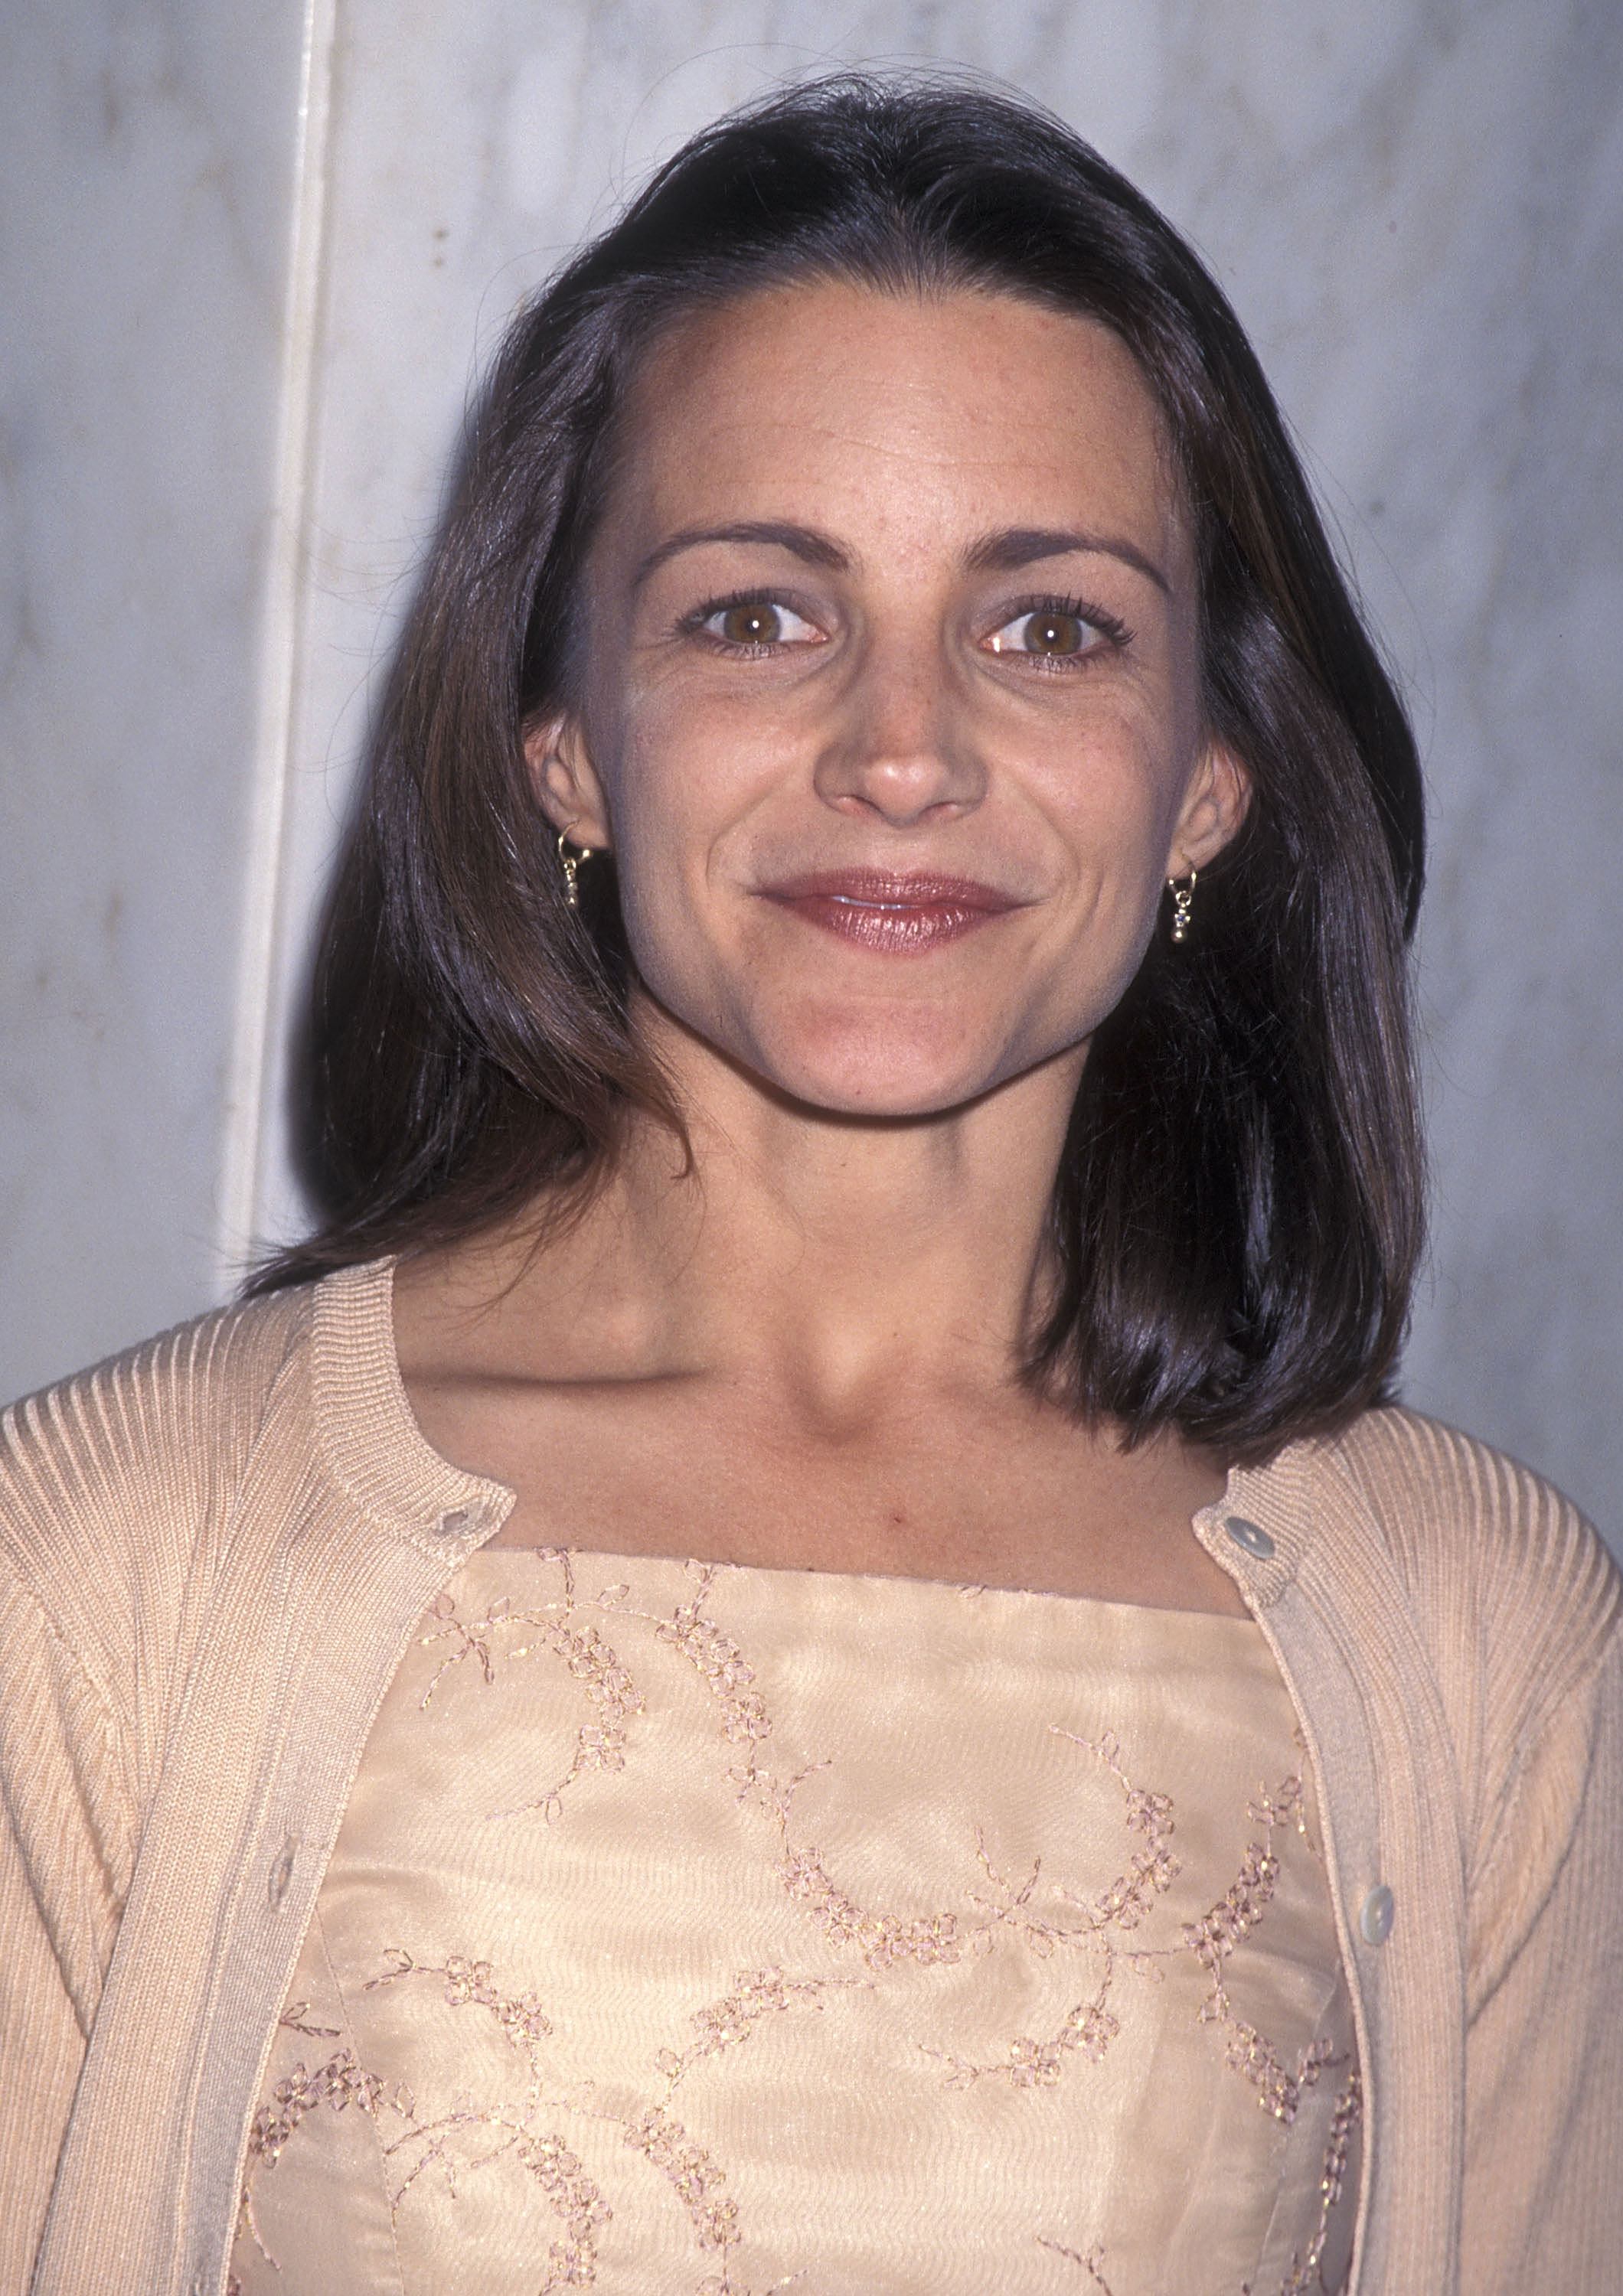 Kristin Davis at the American Oceans Campaign's Fourth Annual Partners Award Salute to Woody Harrelson at the Beverly Wilshire Hotel on April 9, 1997 in Beverly Hills, California. | Source: Getty Images